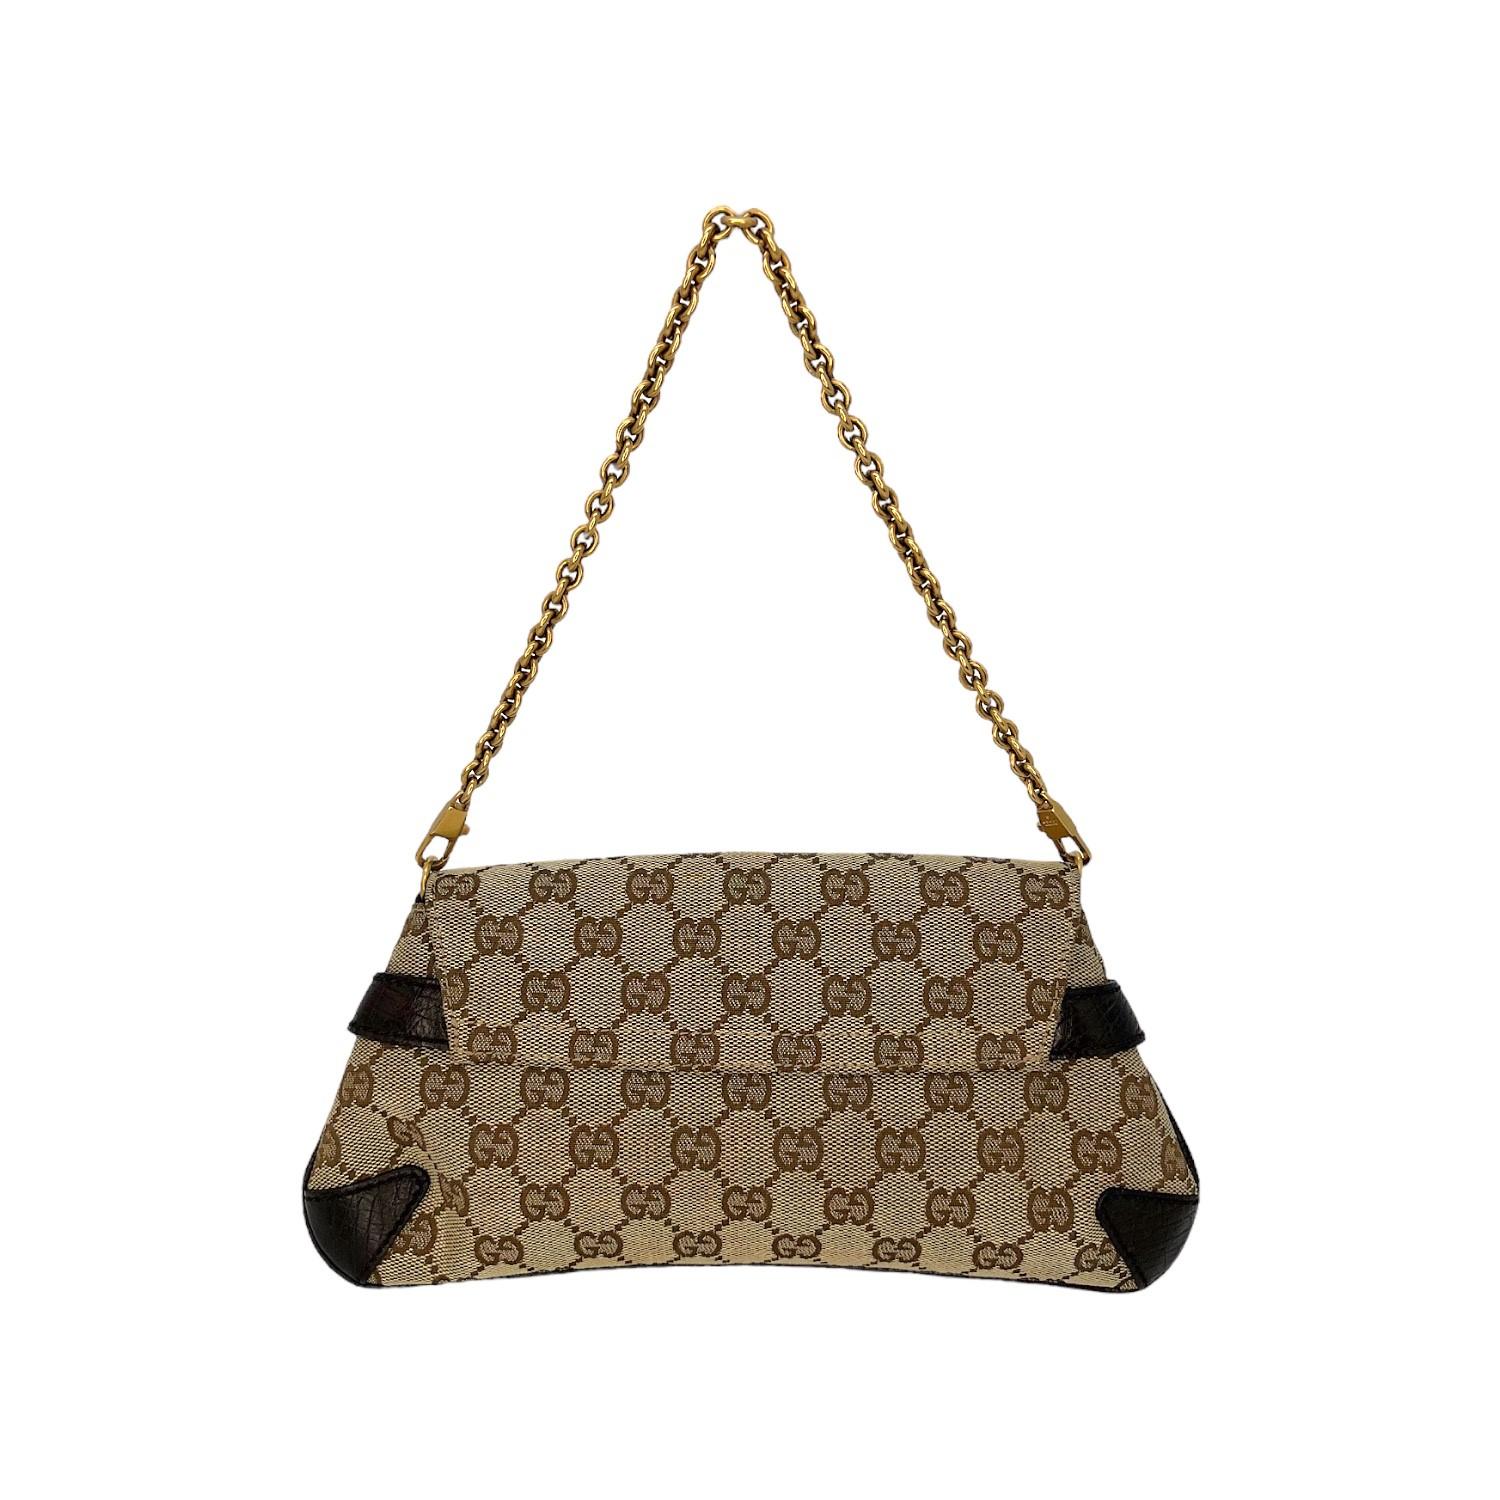 This Gucci Horsebit Clutch was made in Italy and it is finely crafted of the classic Gucci GG Monogram coated canvas with leather trimming and gold-tone hardware features. It has a removeable chain-link handle. It has a fold over closure that opens